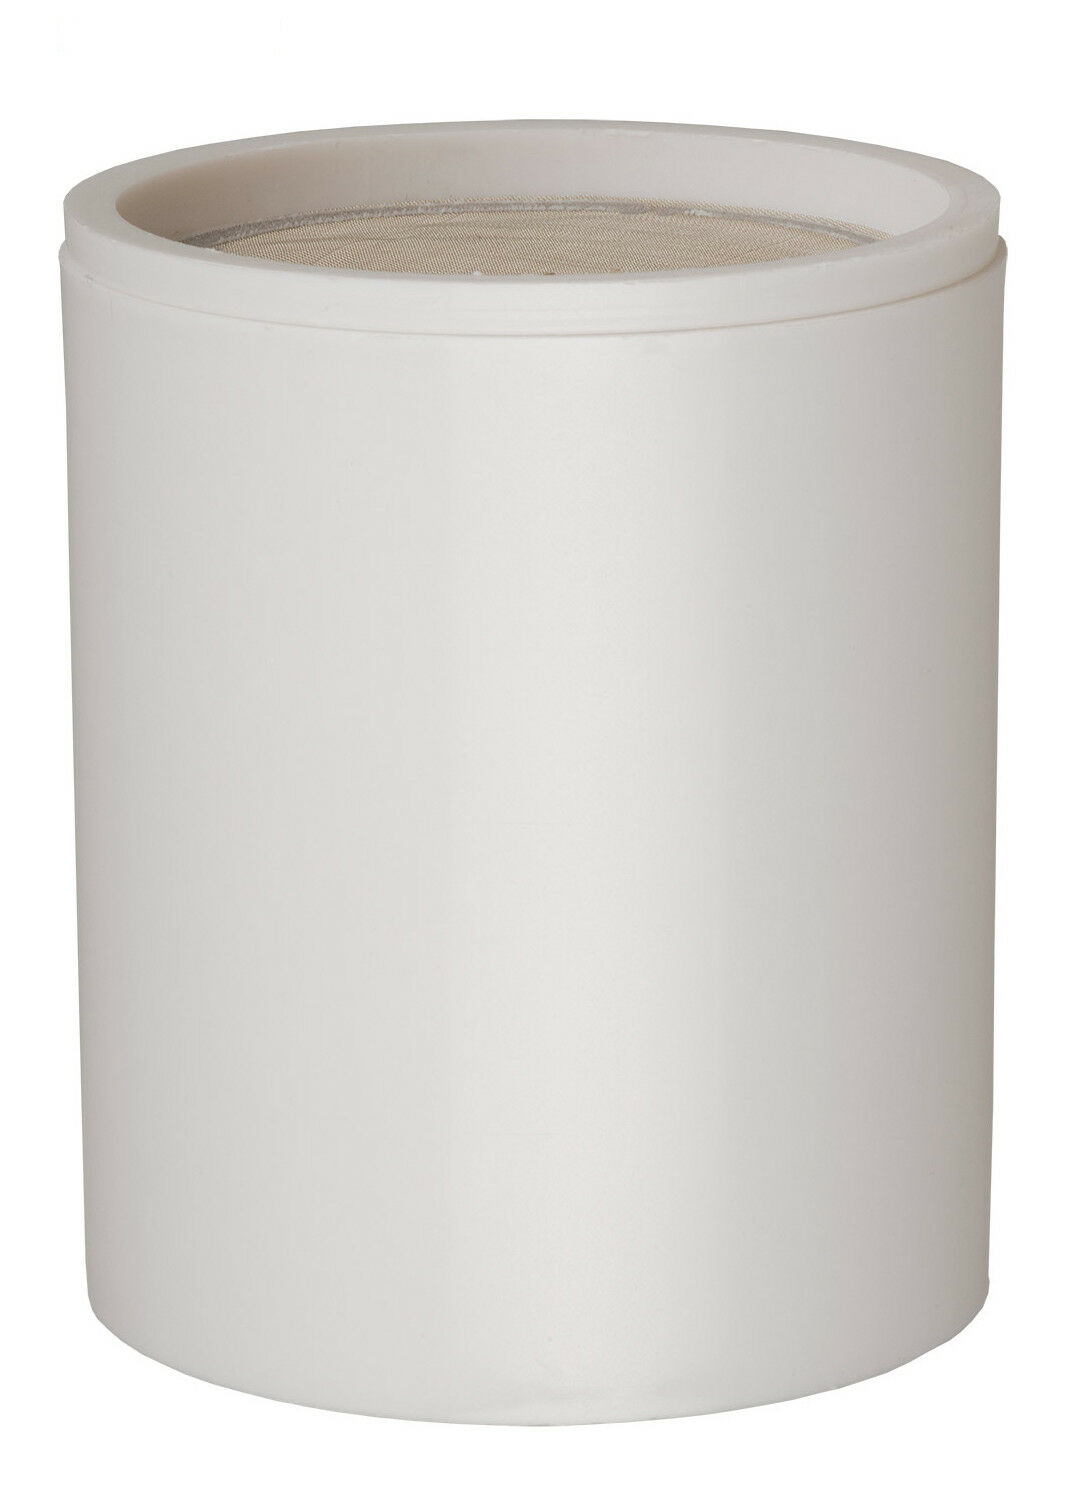 Proone Promax Replacement Shower Filter Cartridge